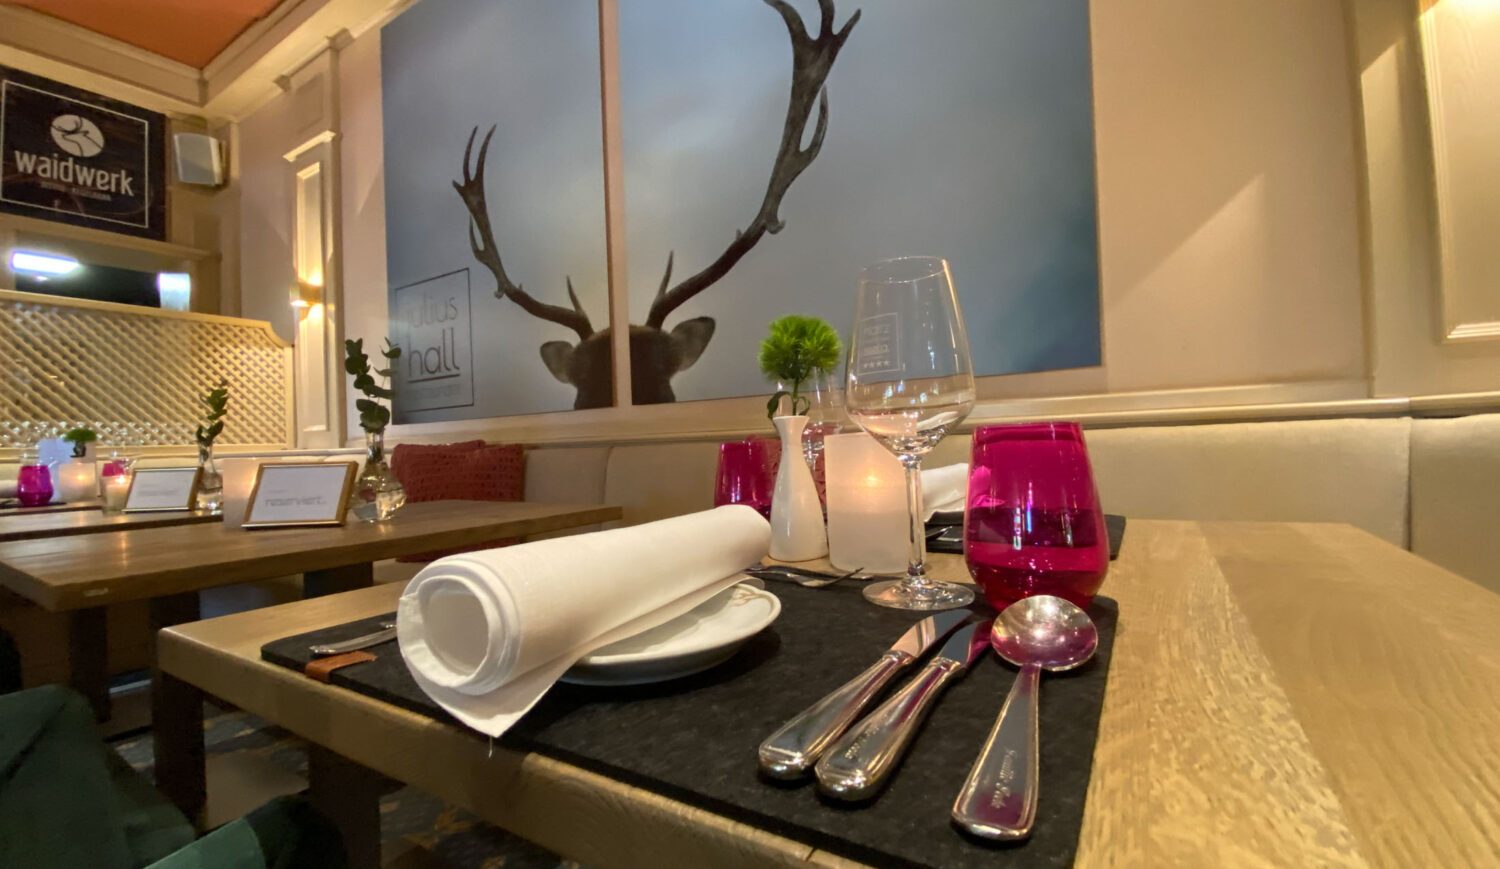 Restaurant at the Harz Hotel & Spa Seela in Bad Harburg © Harz Hotel & Spa Seela